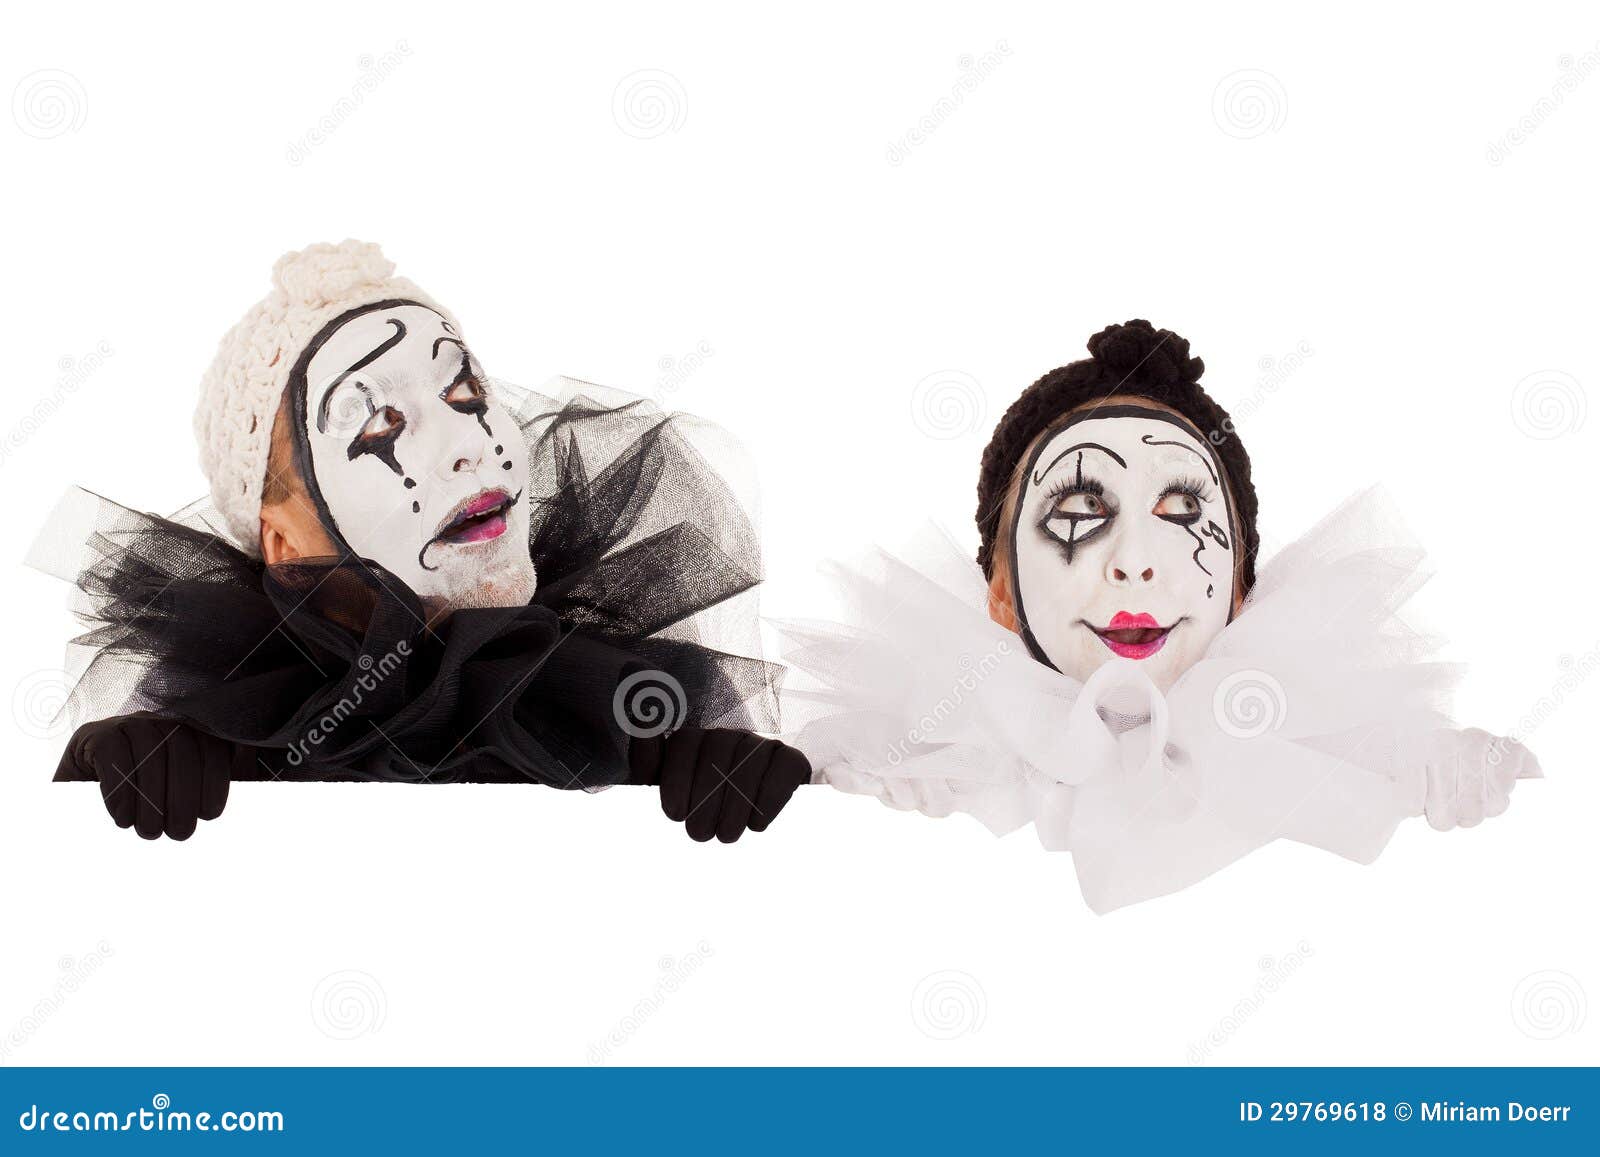 Two Funny Clowns Looking Above a Border Stock Photo - Image of humor ...